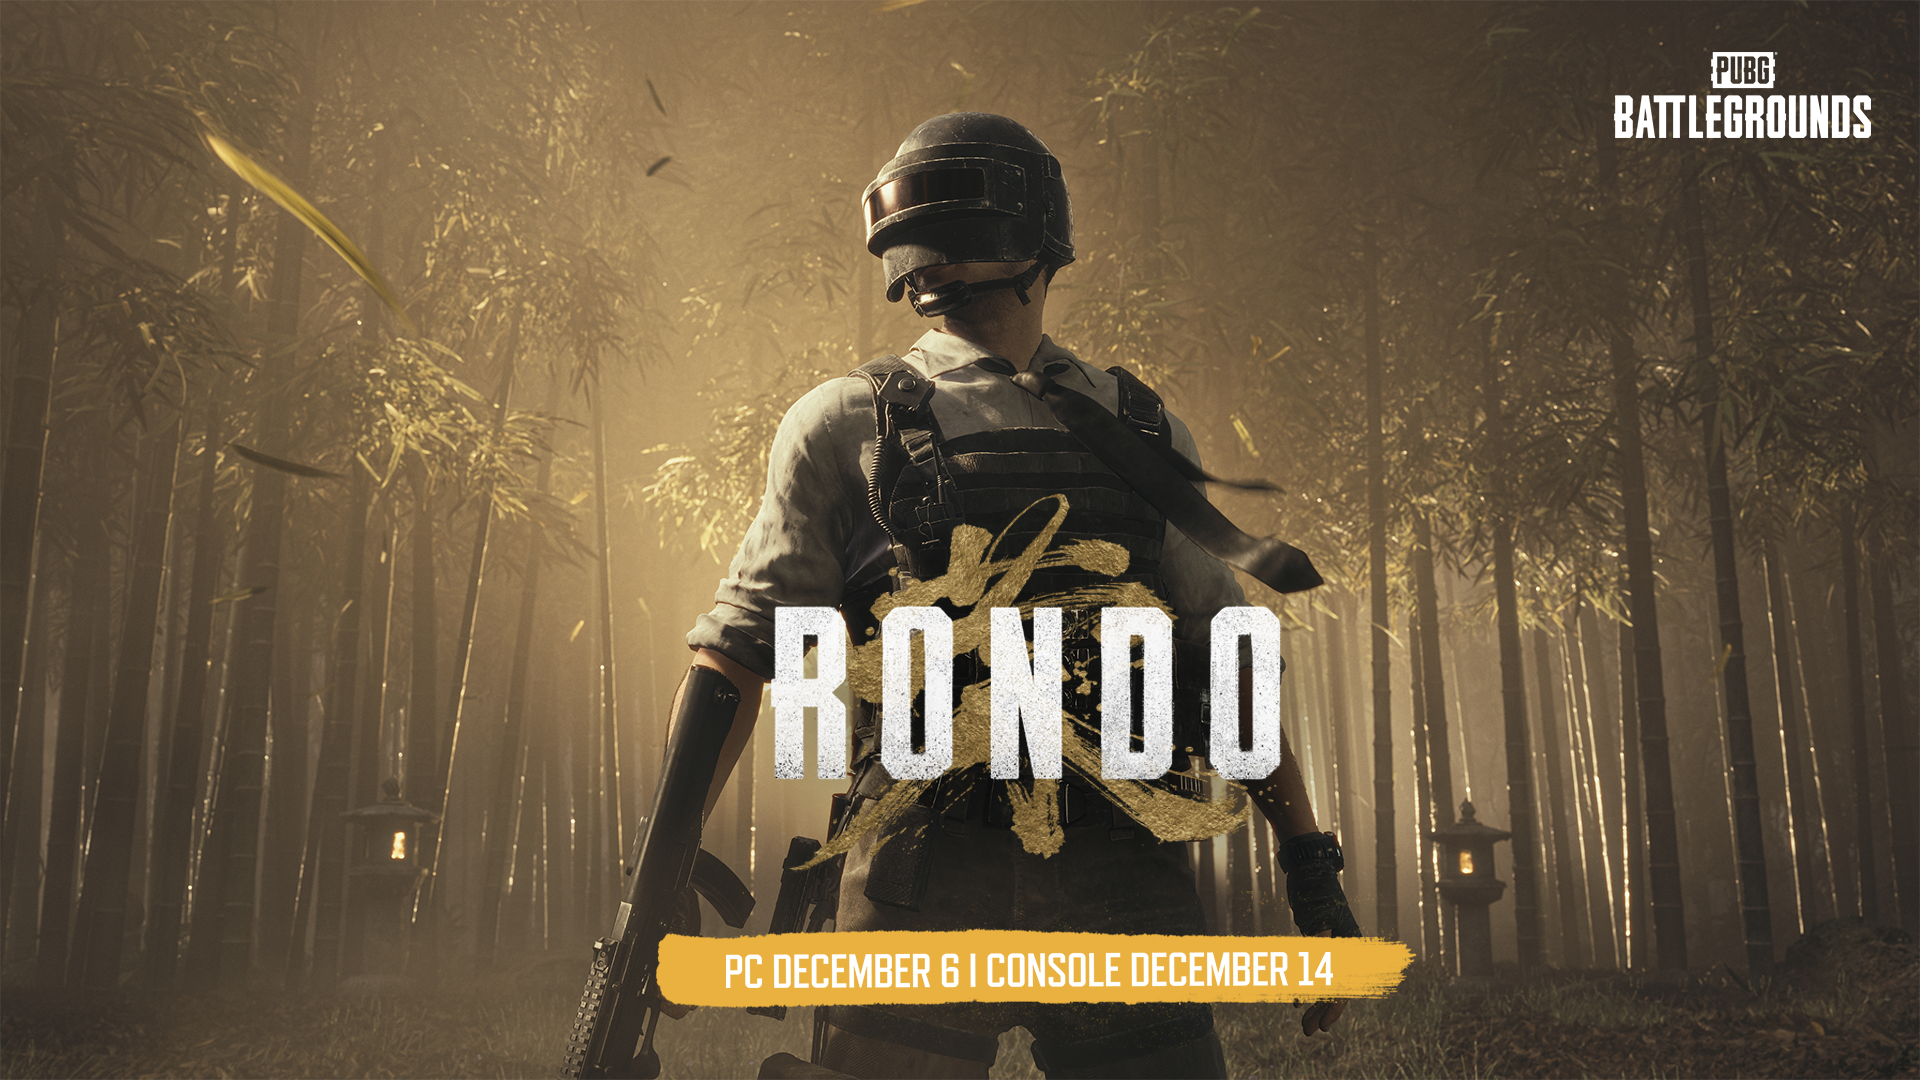 RONDO, the new PUBG map, arrives on December 6